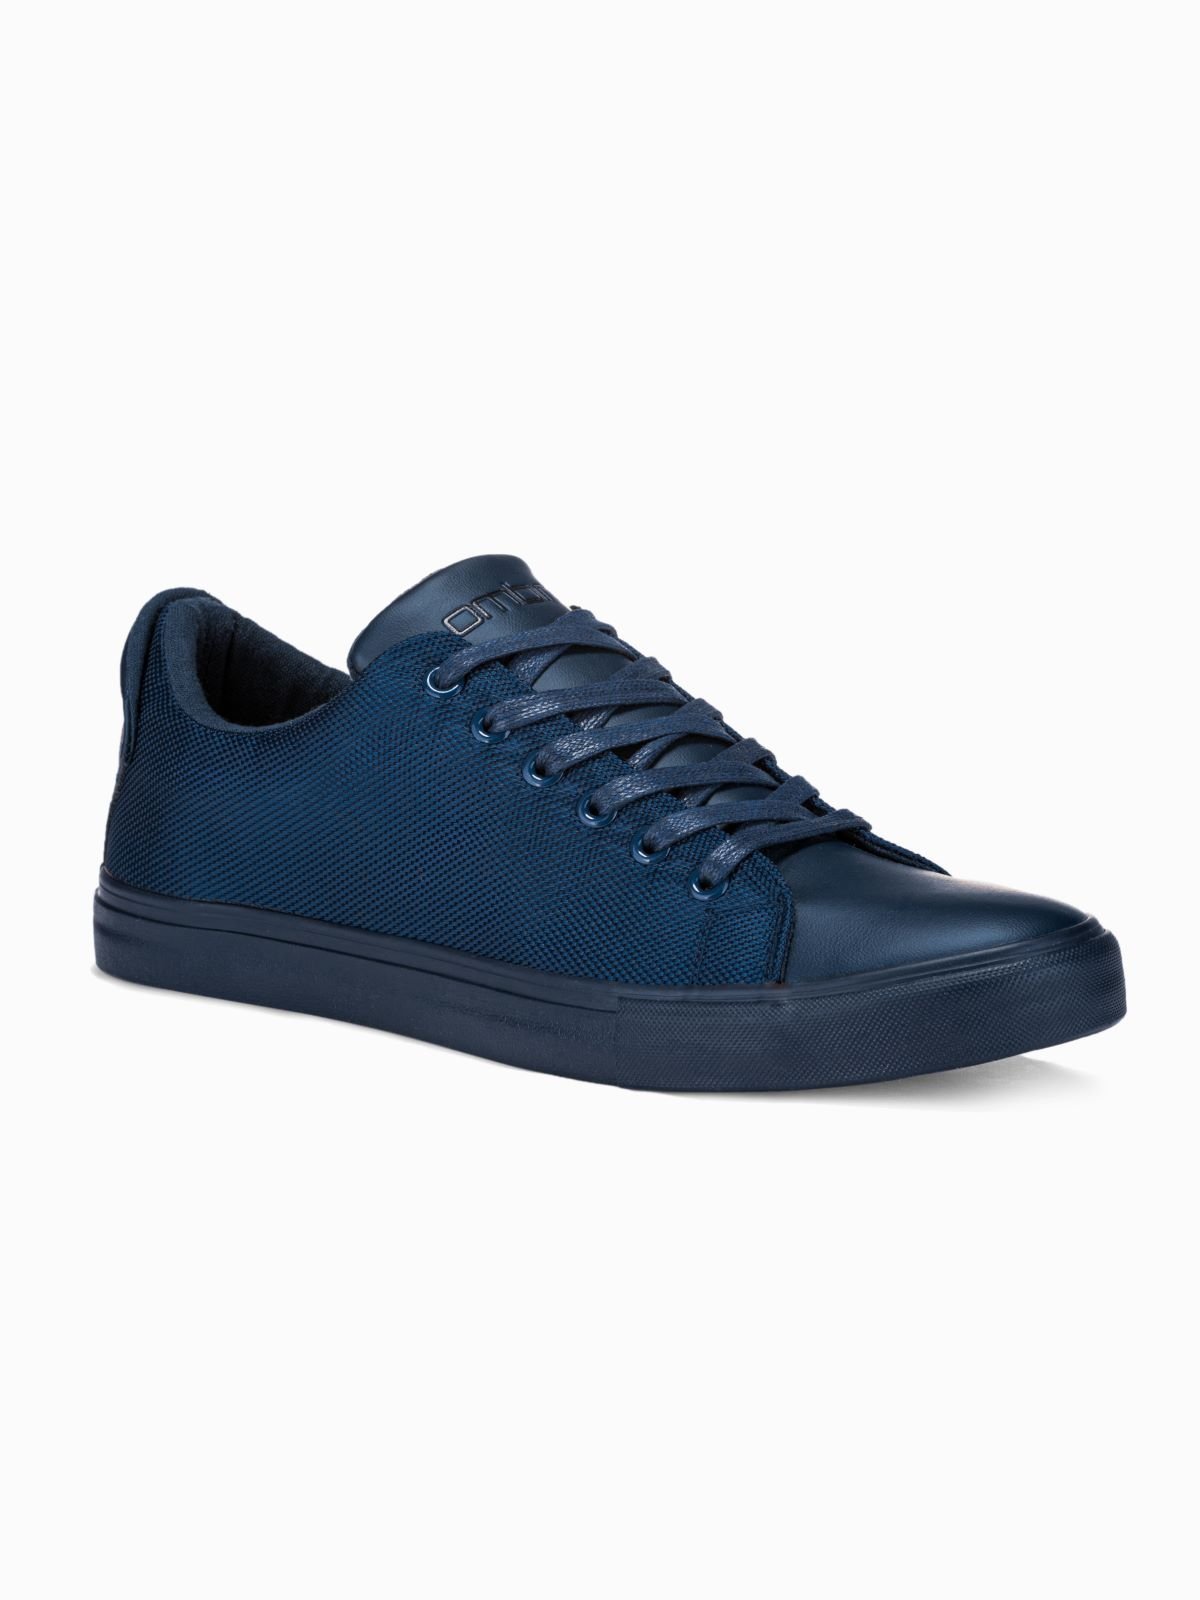 Levně Ombre BASIC men's shoes sneakers in combined materials - navy blue